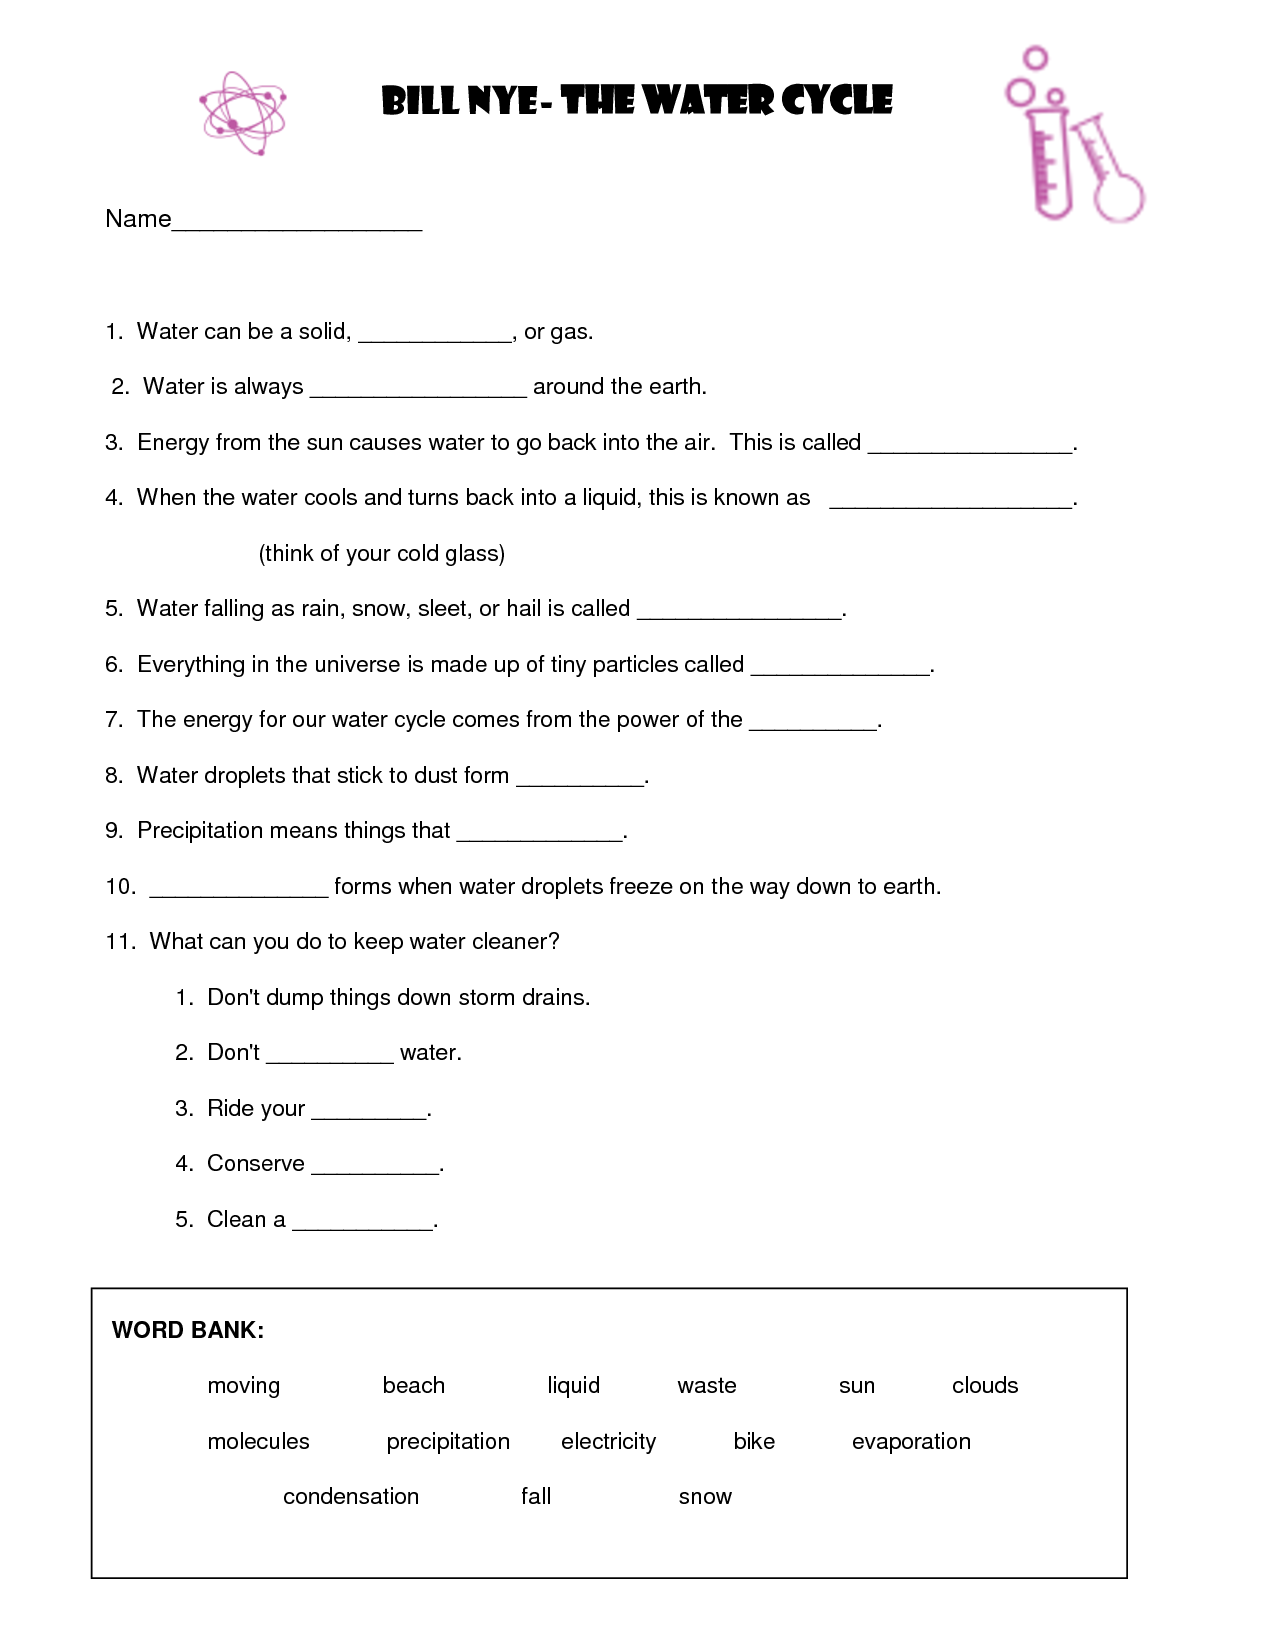 13 Best Images Of The Water Cycle Worksheet Answers Blank Water Cycle Diagram Worksheet Blank 